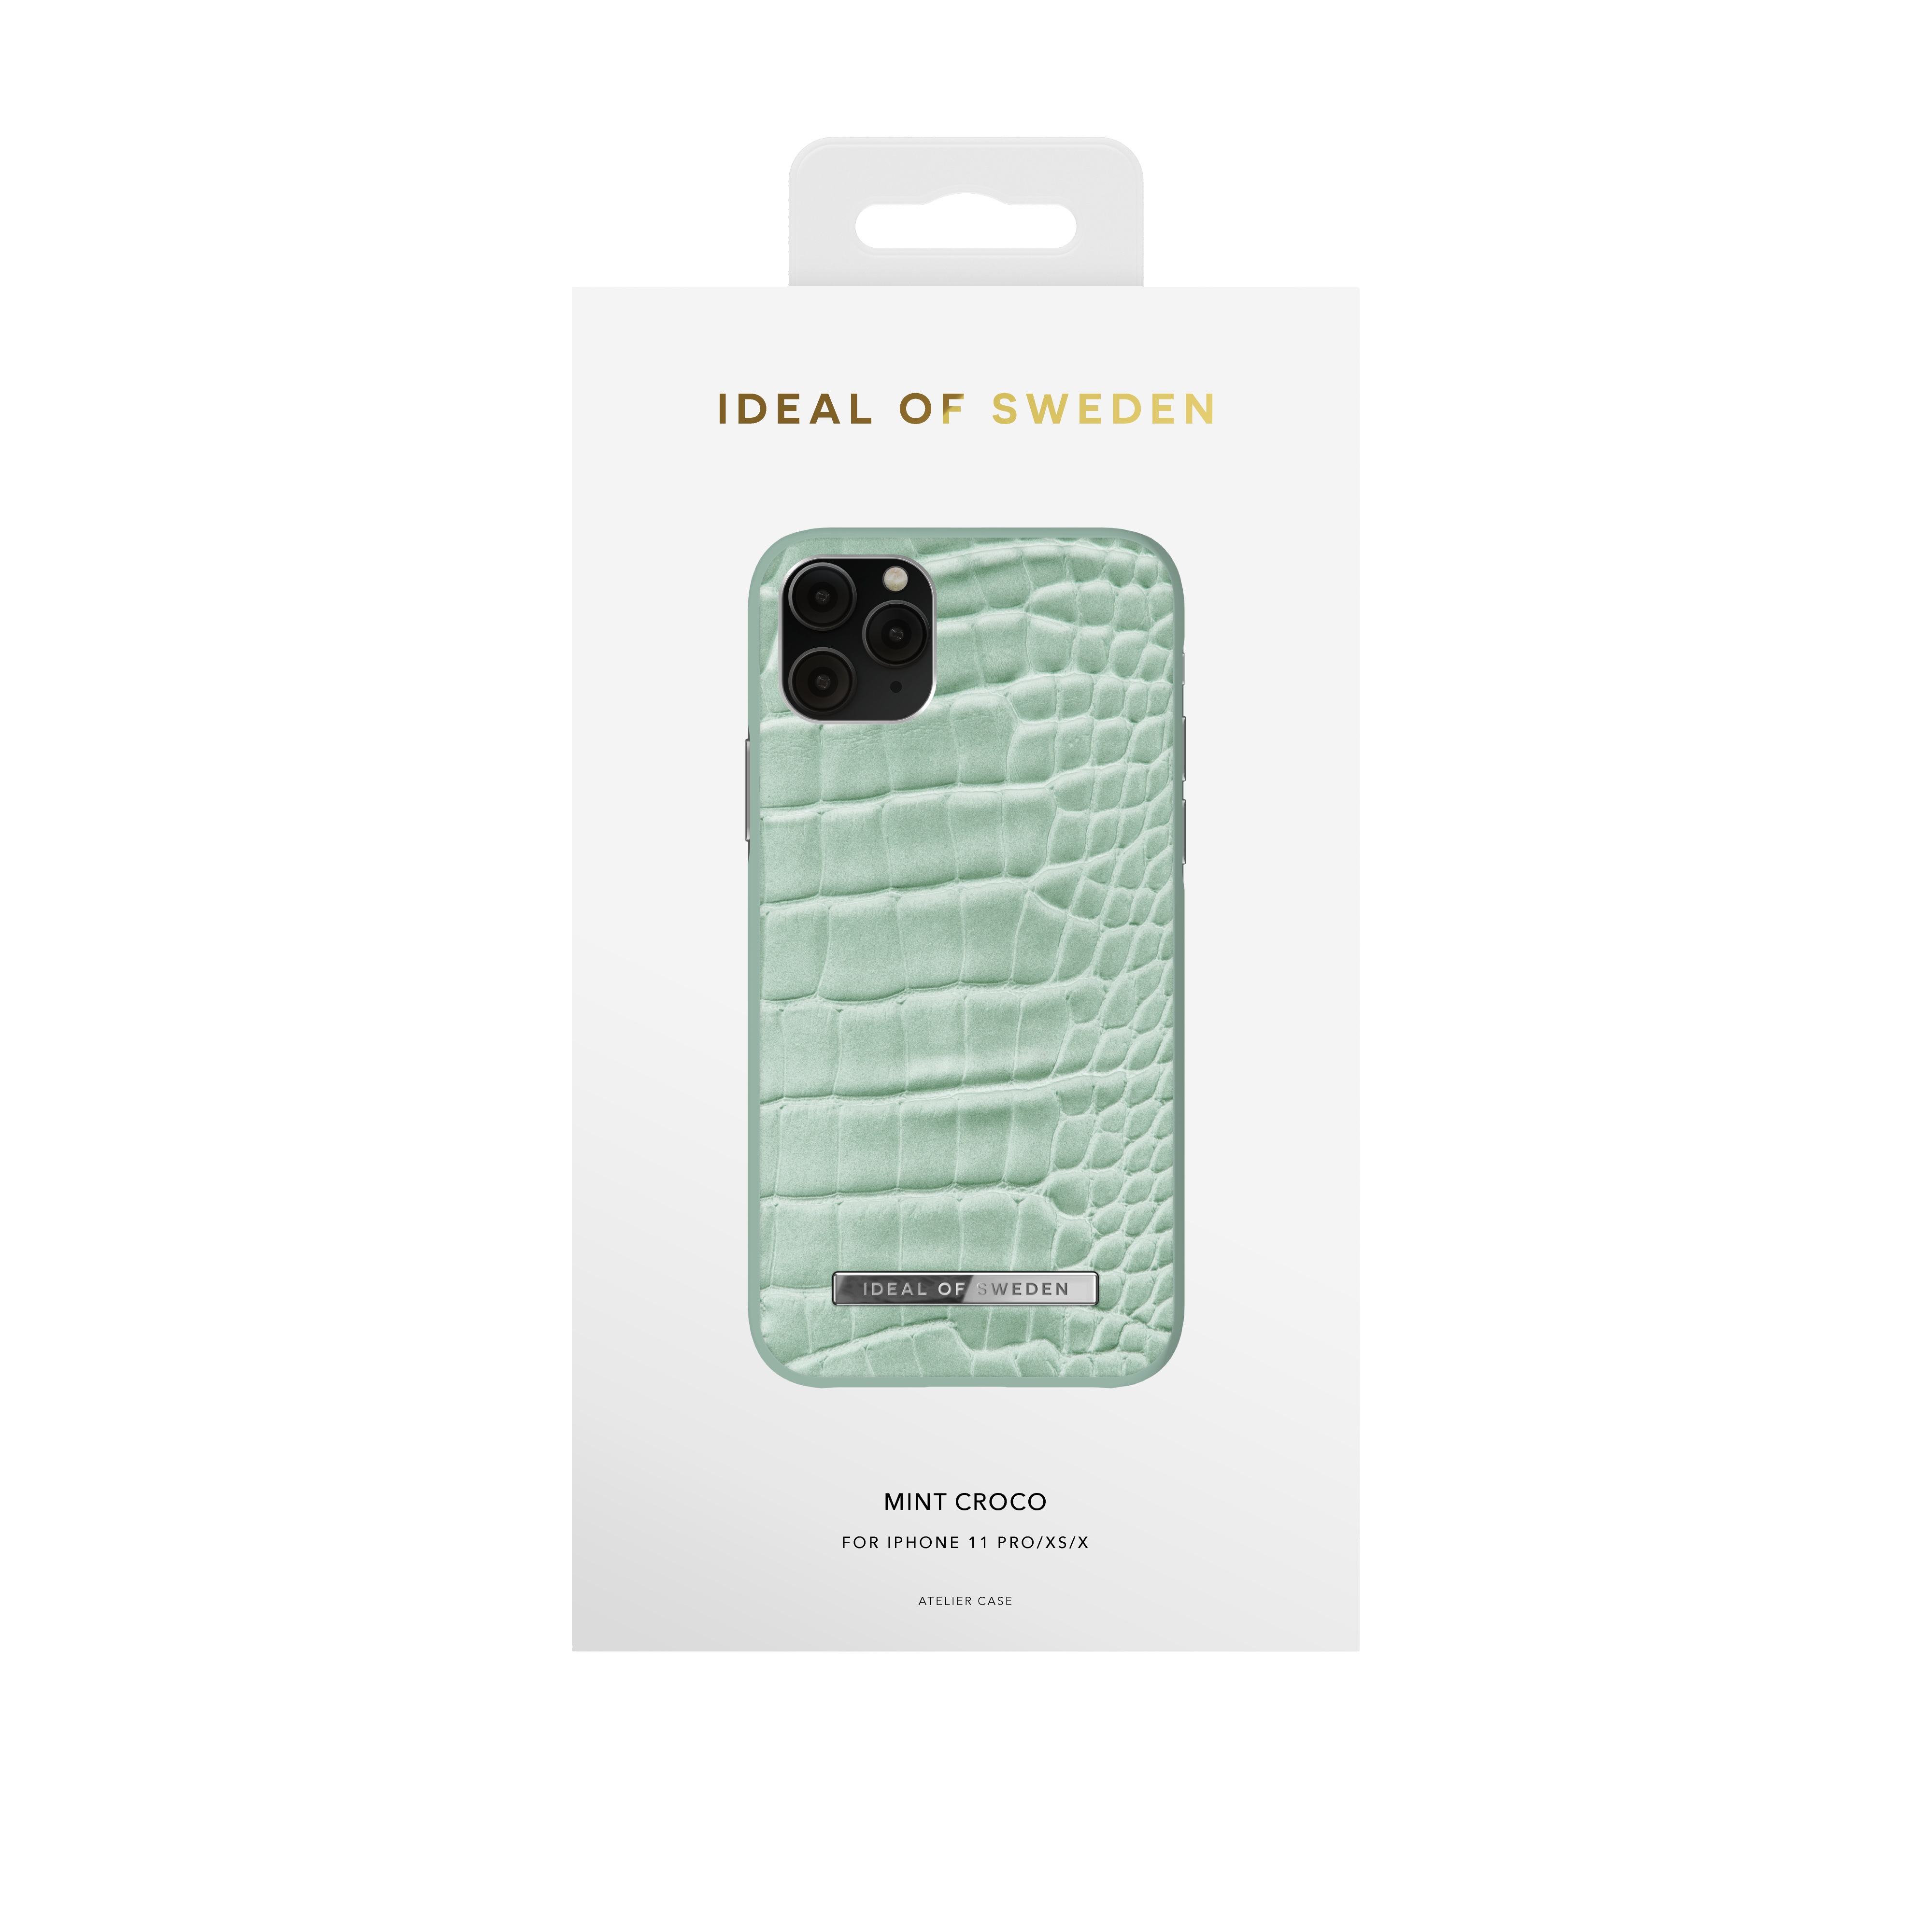 11 Mint iPhone iPhone XS, IDACSS21-I1958-261, iPhone OF Croco IDEAL Apple, X, SWEDEN Backcover, Pro,